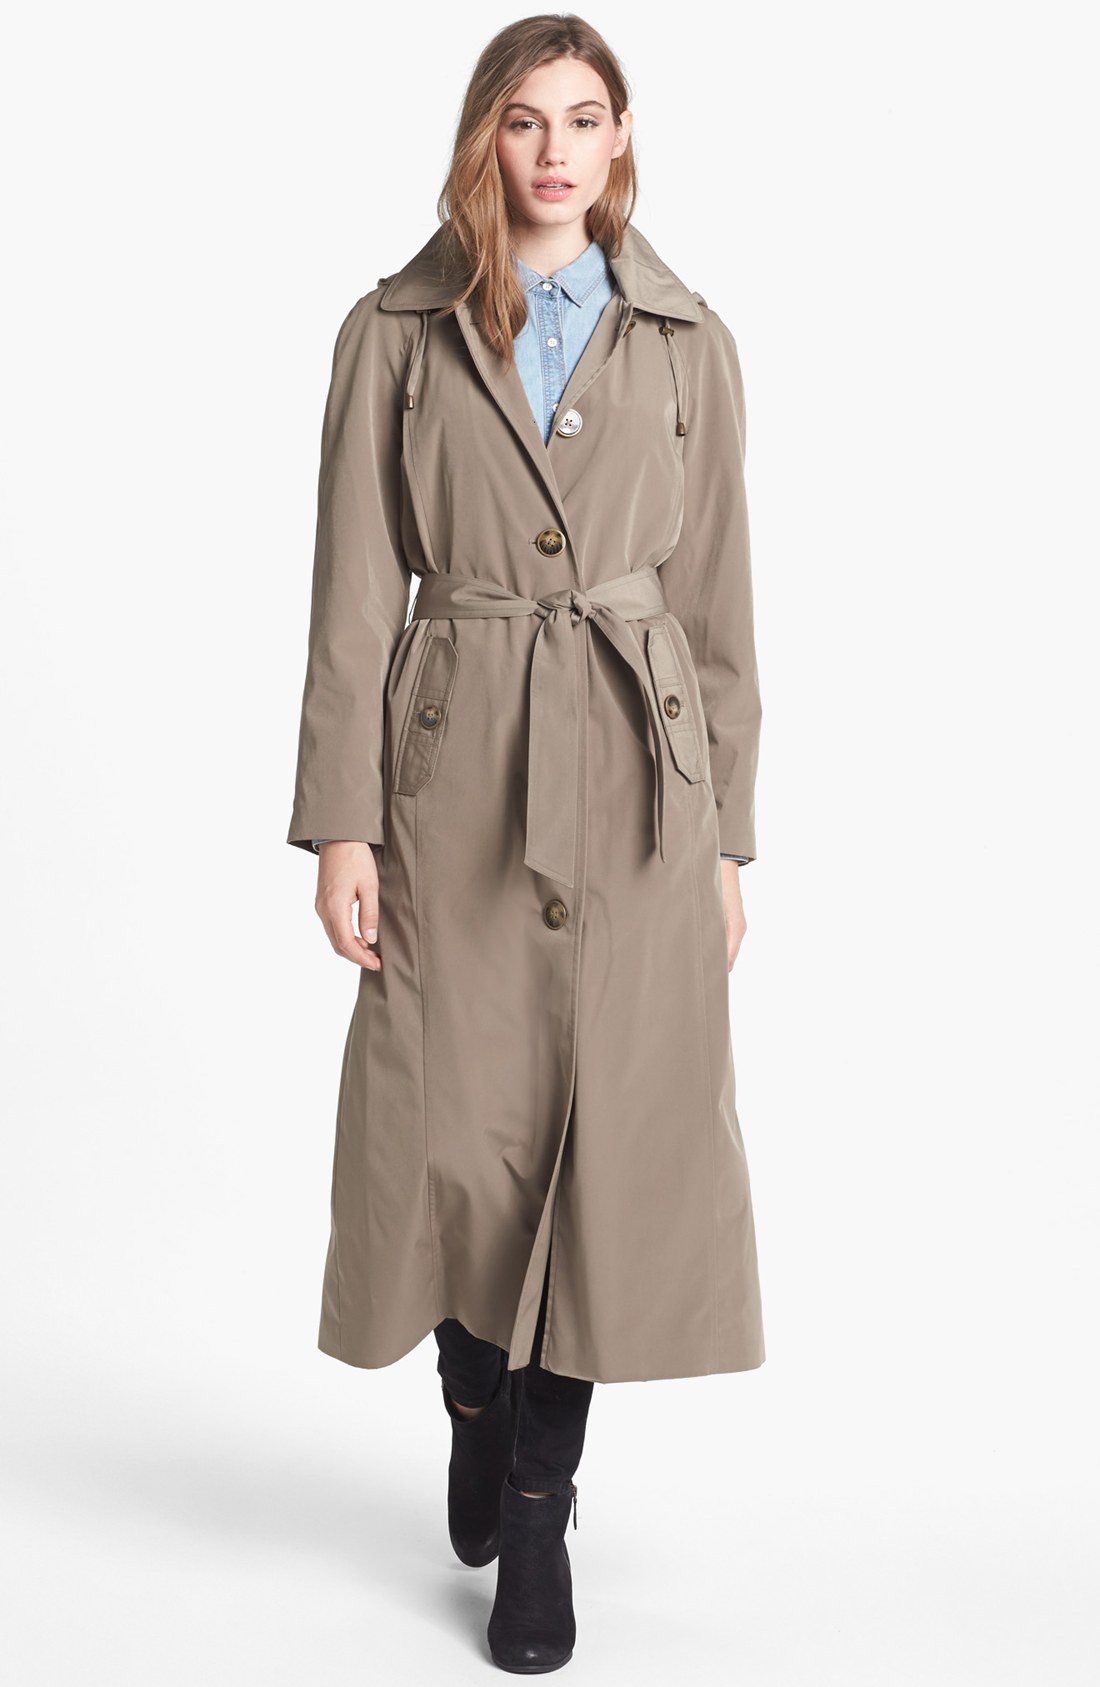 London fog trench coats for women. Clothing stores